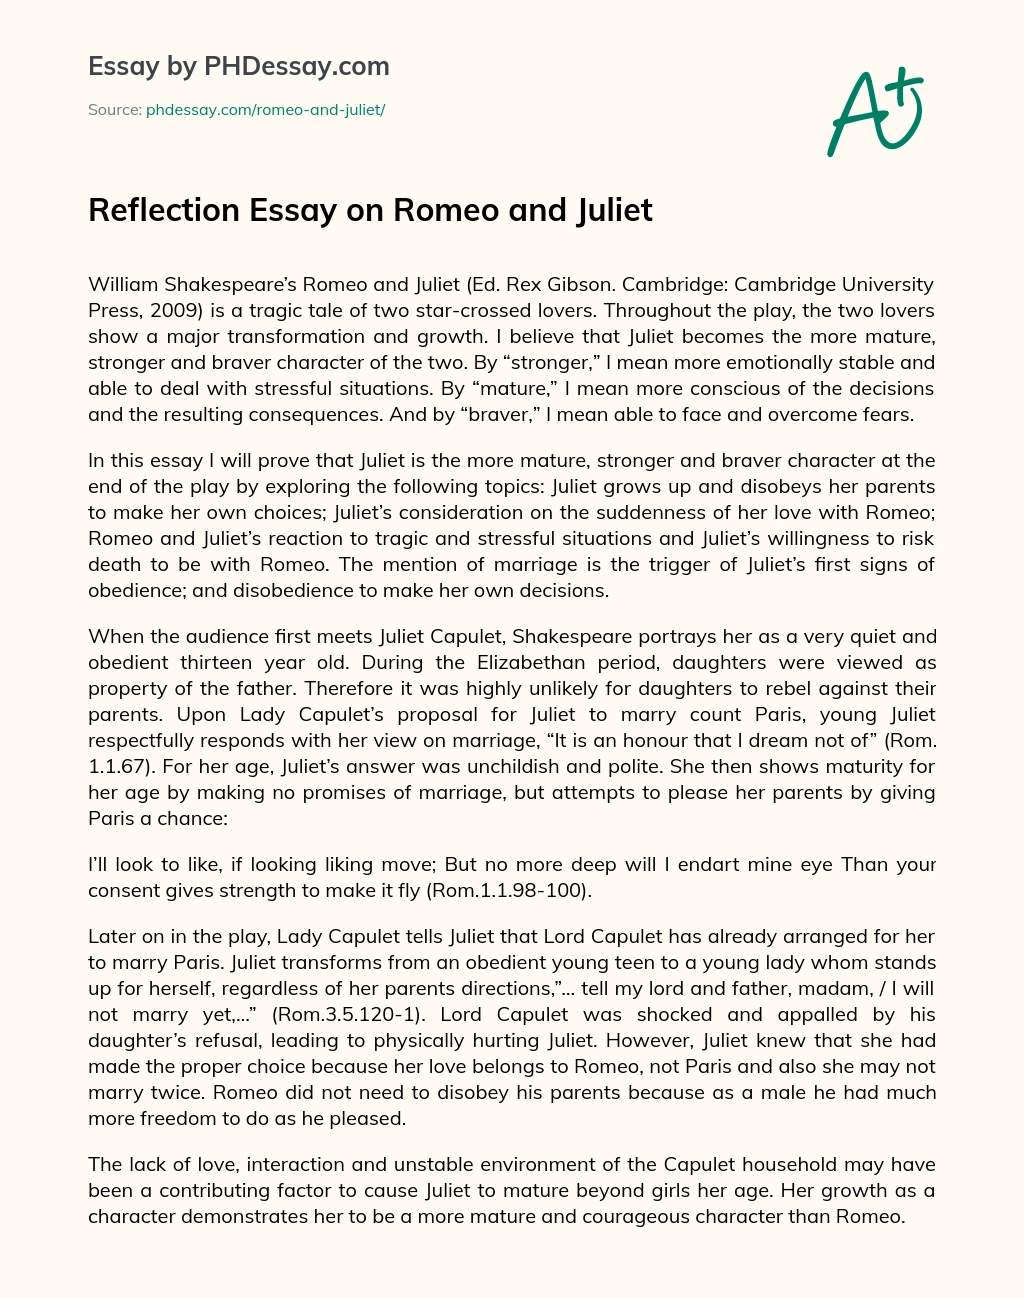 Reflection Essay on Romeo and Juliet essay